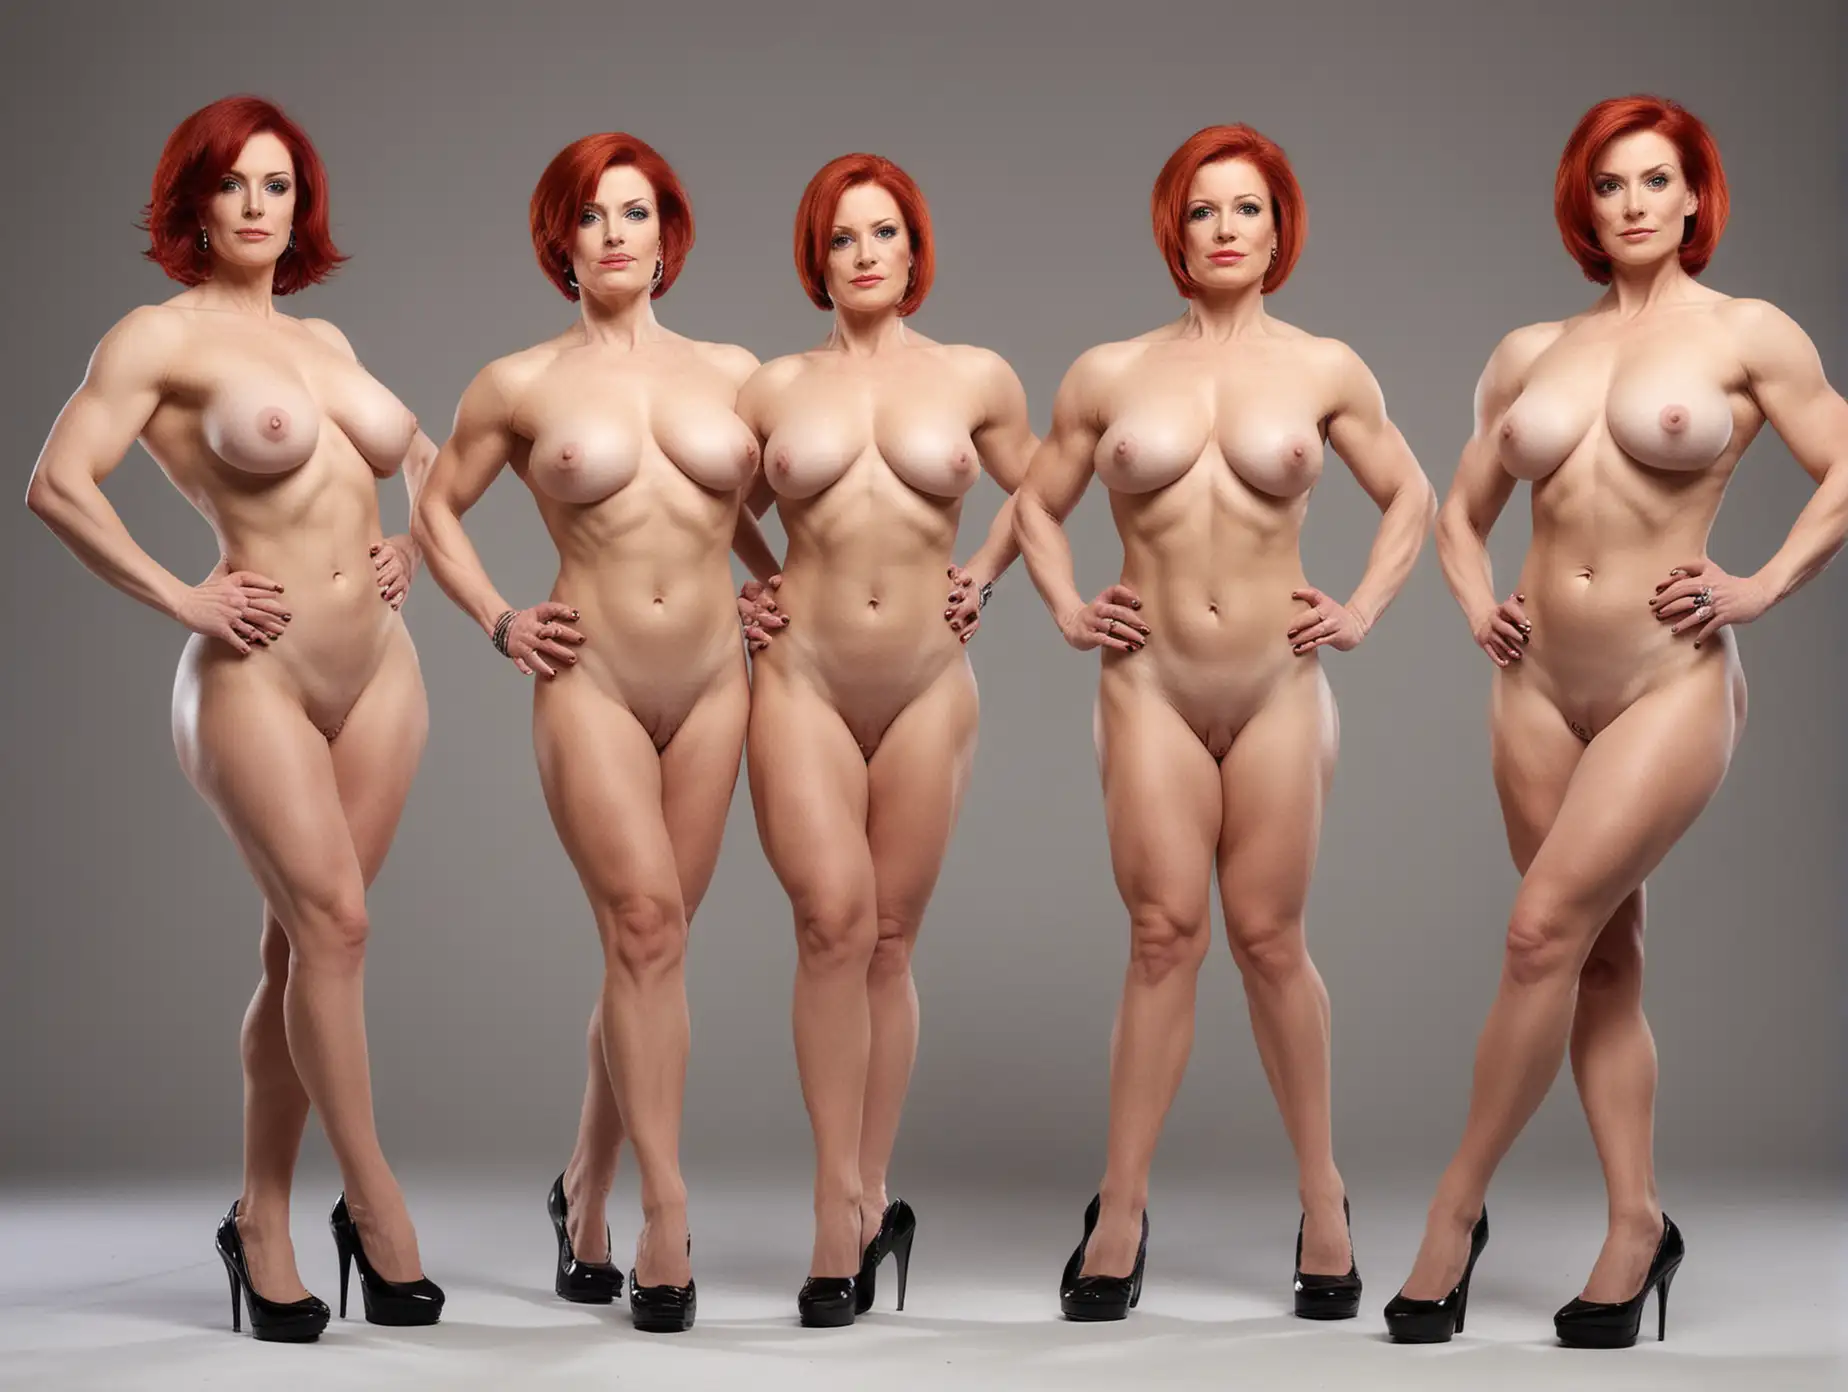 Four fully nude female bodybuilders, overall view, 50 years old, standing on very high heels, black high heels, standing in a studio, pale skin, luscious red hair, short haircut 'Bob', with a side parting, long slender neck, gigantic breasts, enormous hips, huge genitals, very long legs, arms raised, blue eyes, serious face expression.